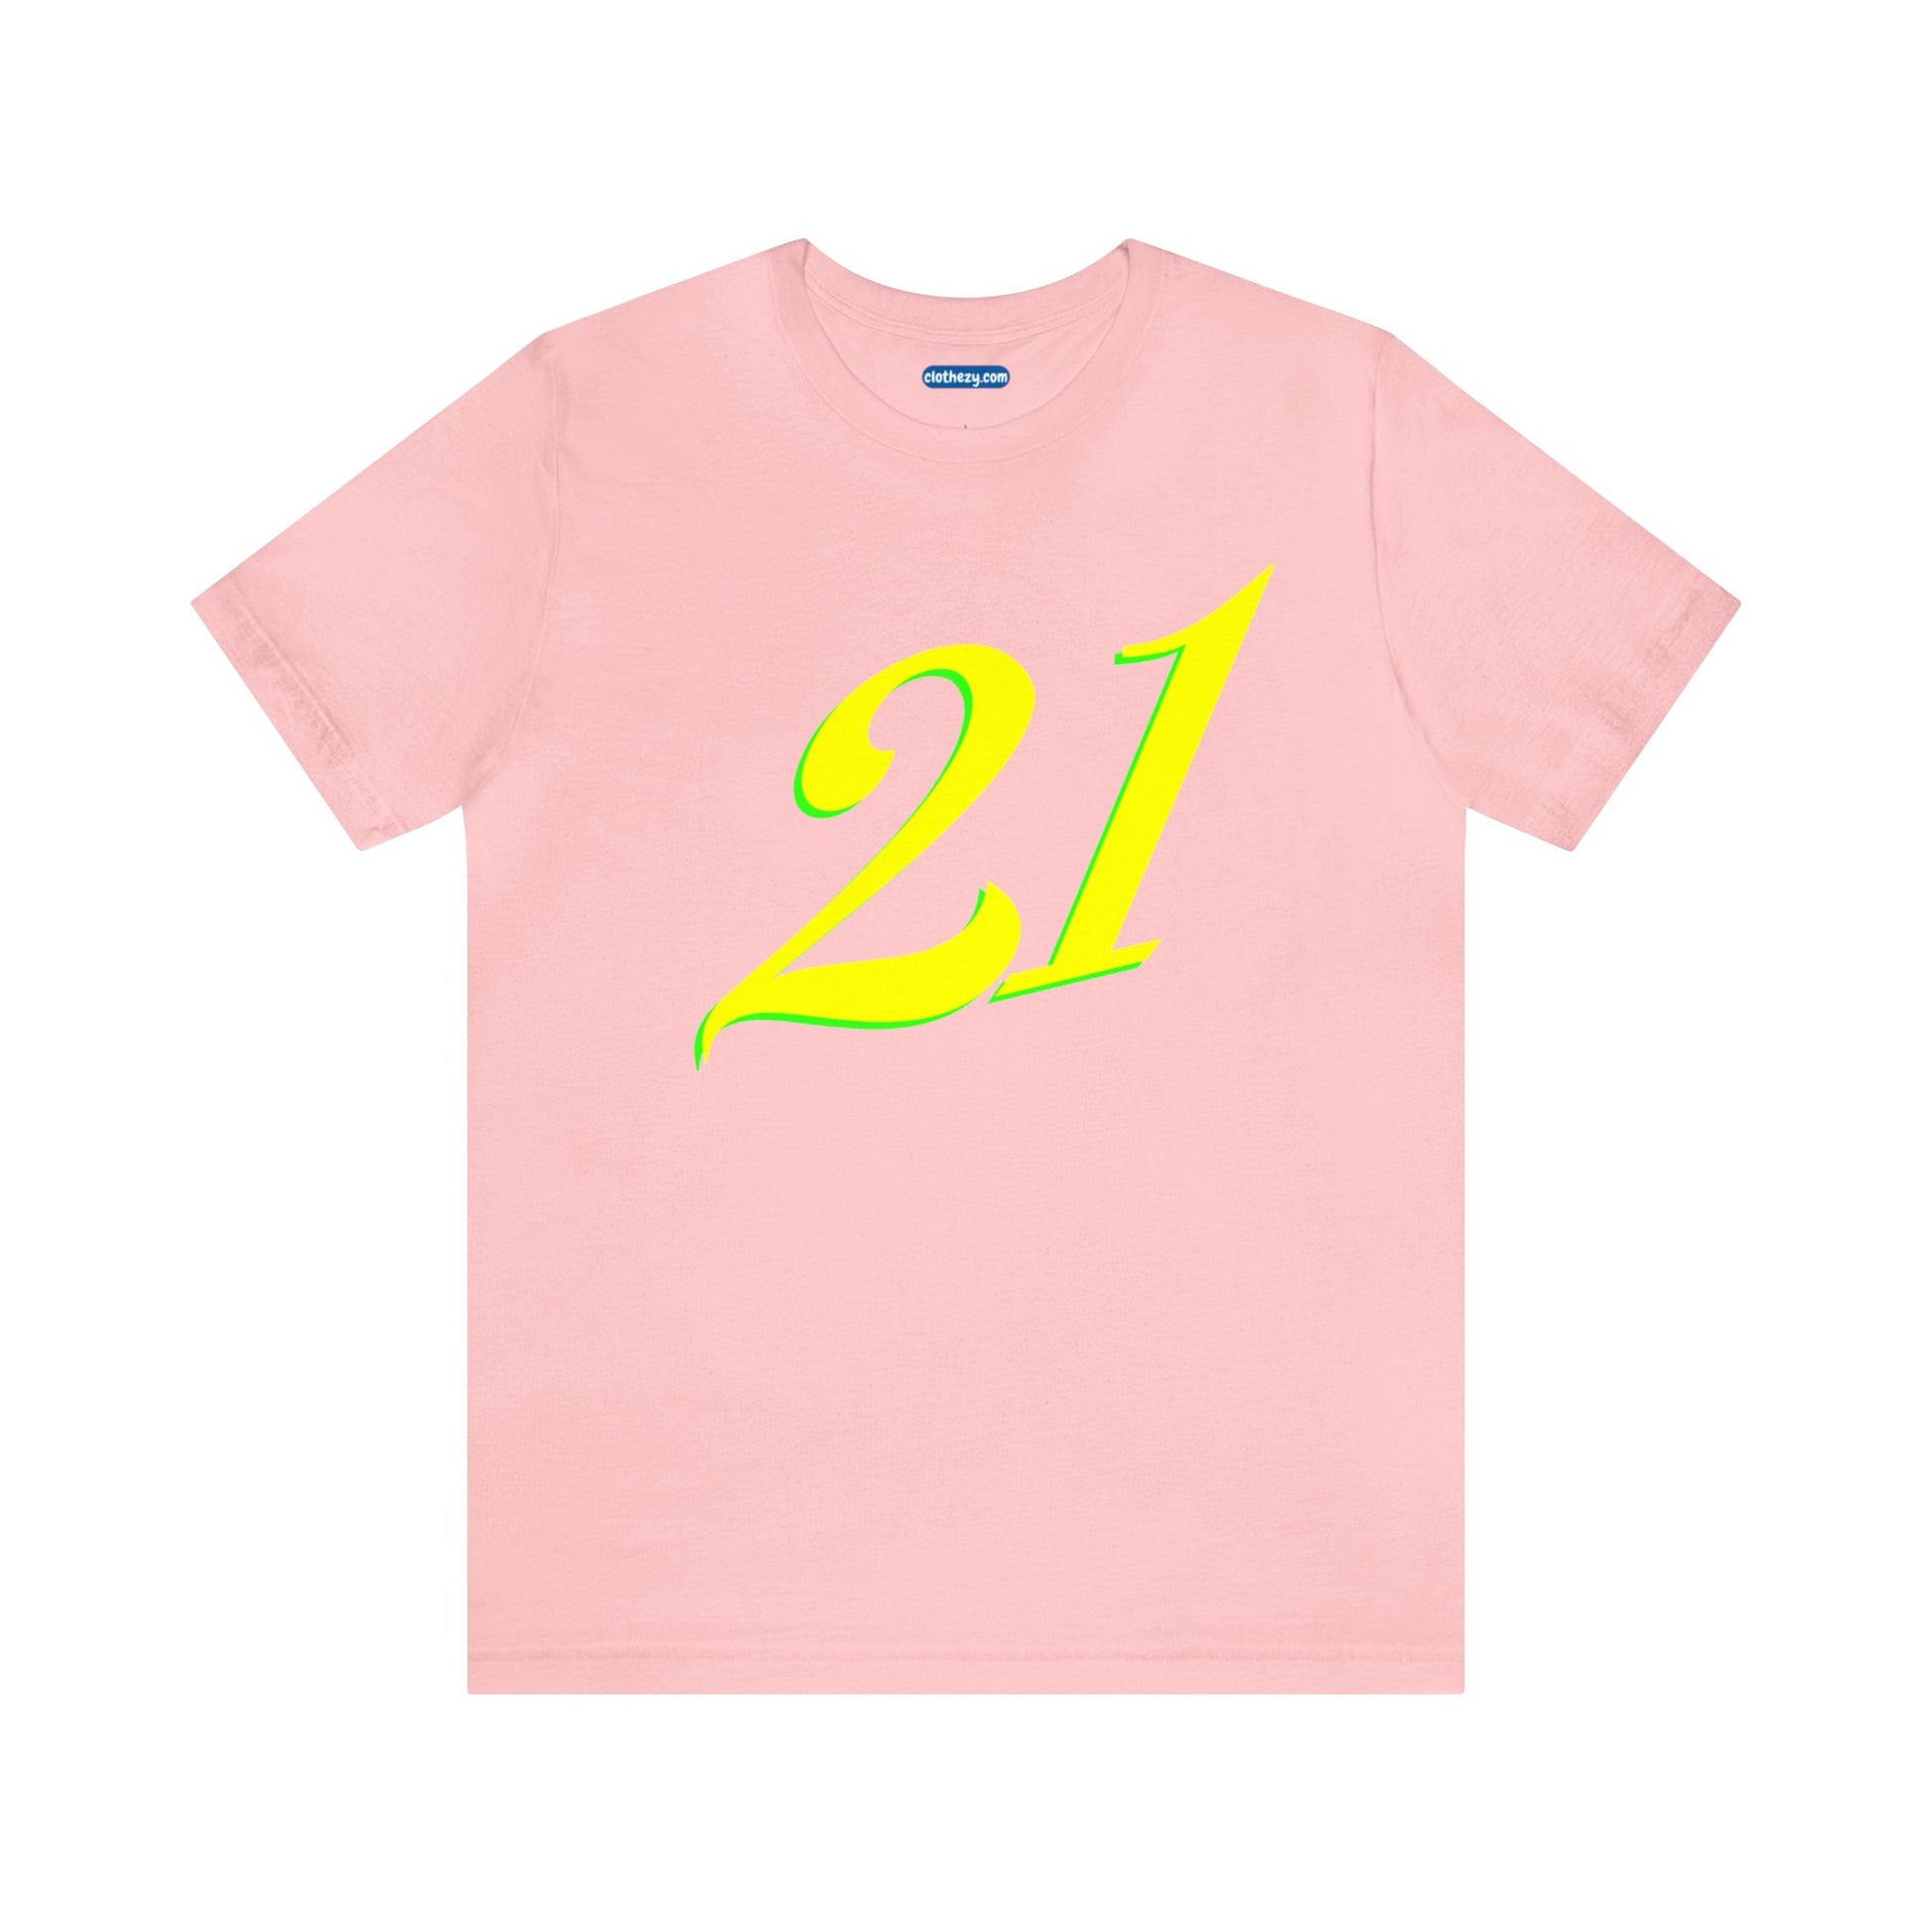 Number 21 Design - Soft Cotton Tee for birthdays and celebrations, Gift for friends and family, Multiple Options by clothezy.com in Red Size Small - Buy Now